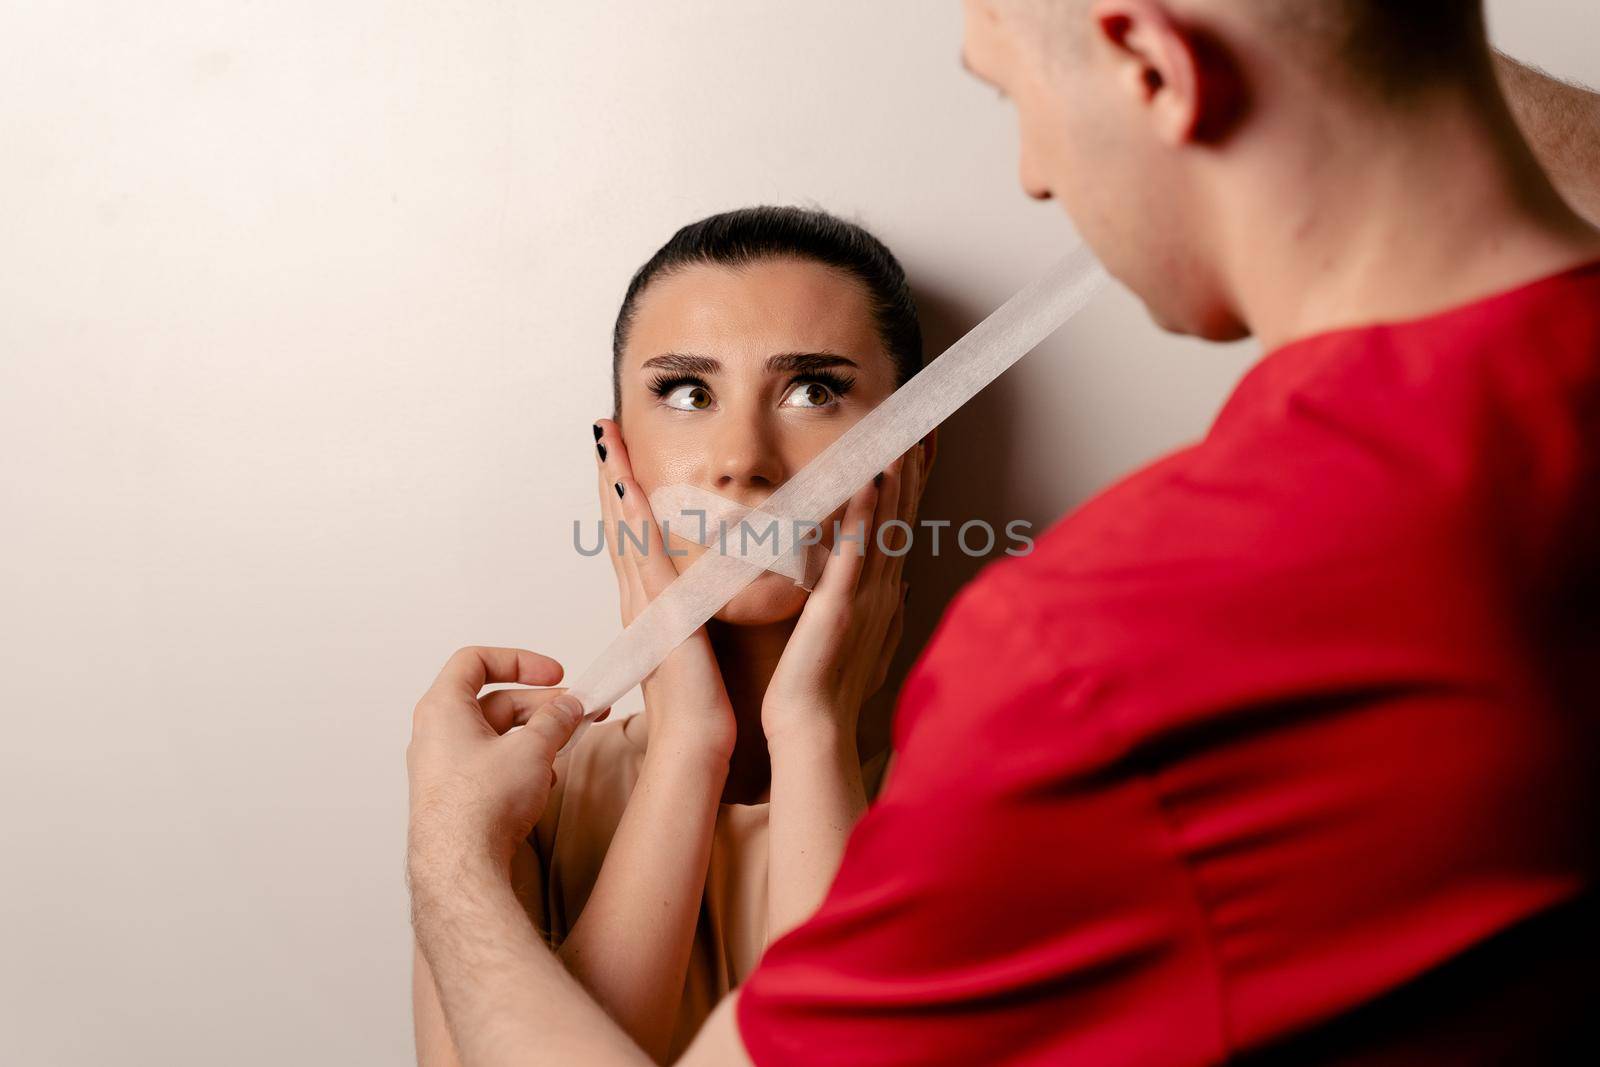 Model with glued mouth. Man covers woman mouth with tape. Stop talking